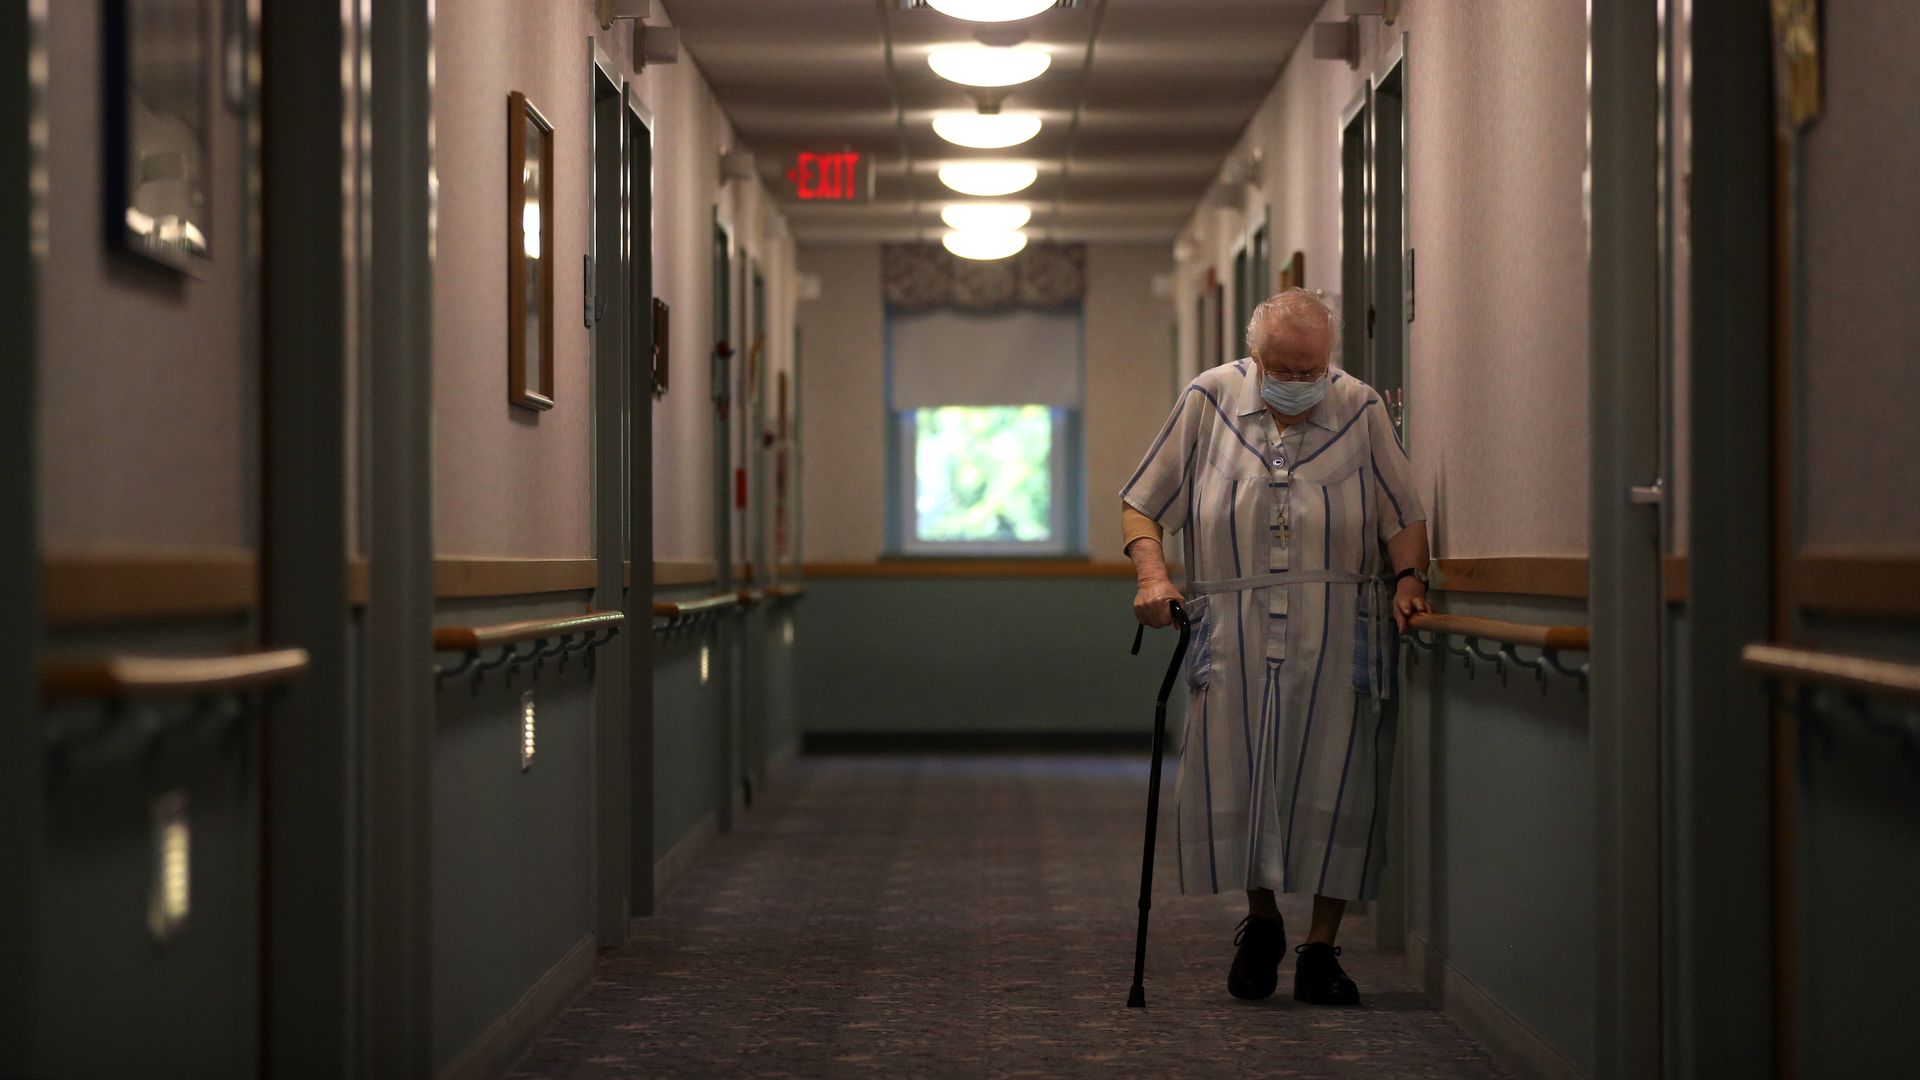 Picture of a hallway in a nursing home with an elder person walking